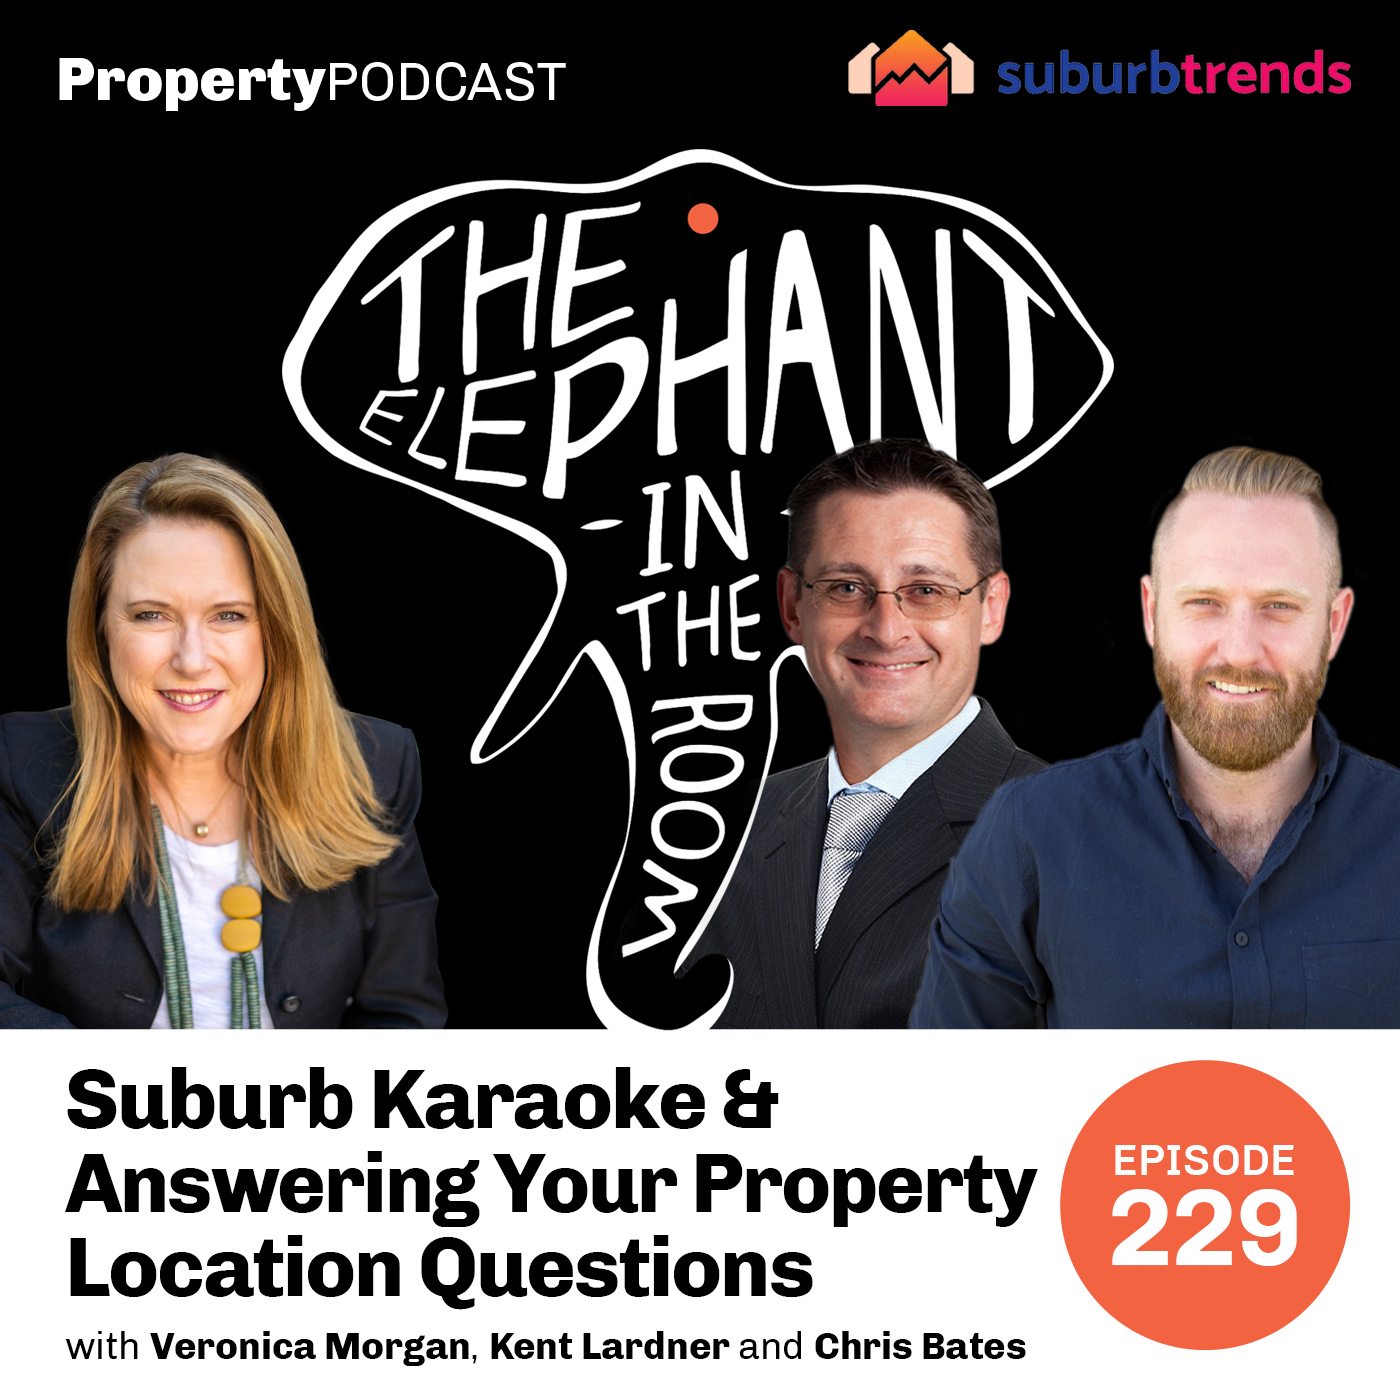 Suburb Trends May 2022 | Suburb Karaoke & Answering Your Property Location Questions